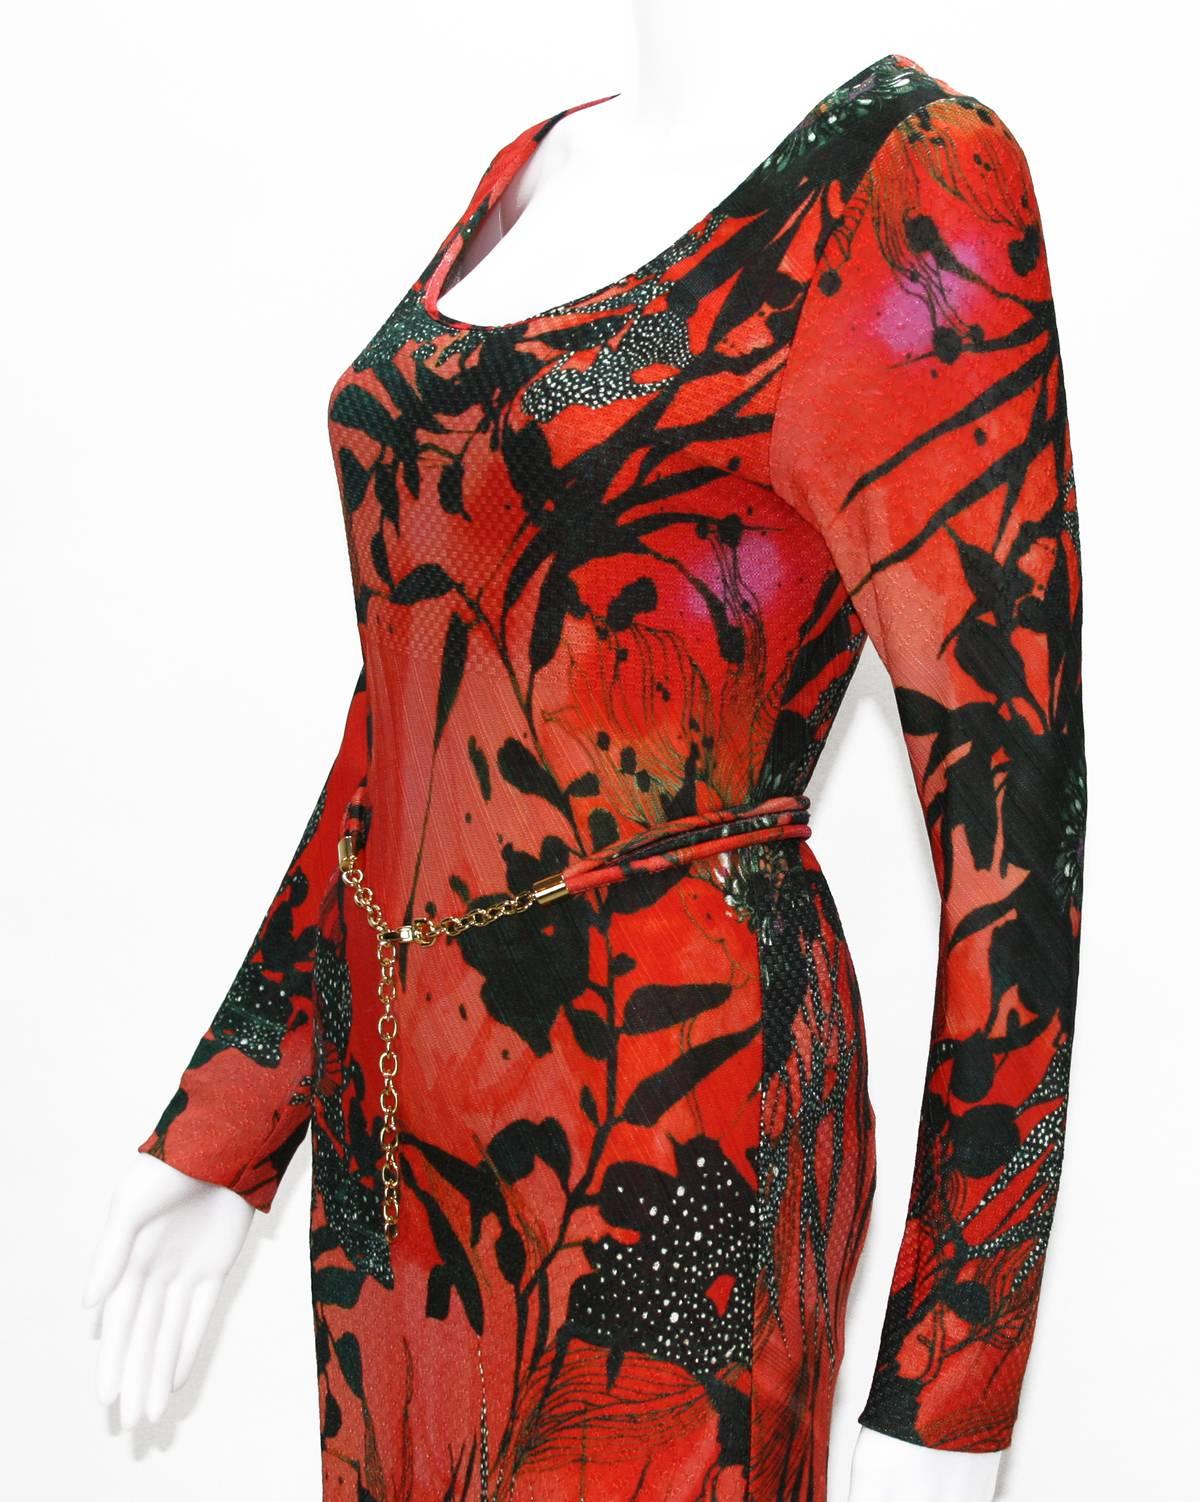 New ETRO Jersey Red Black Floral Print Long Dress with Belt IT.42 - US 6 2